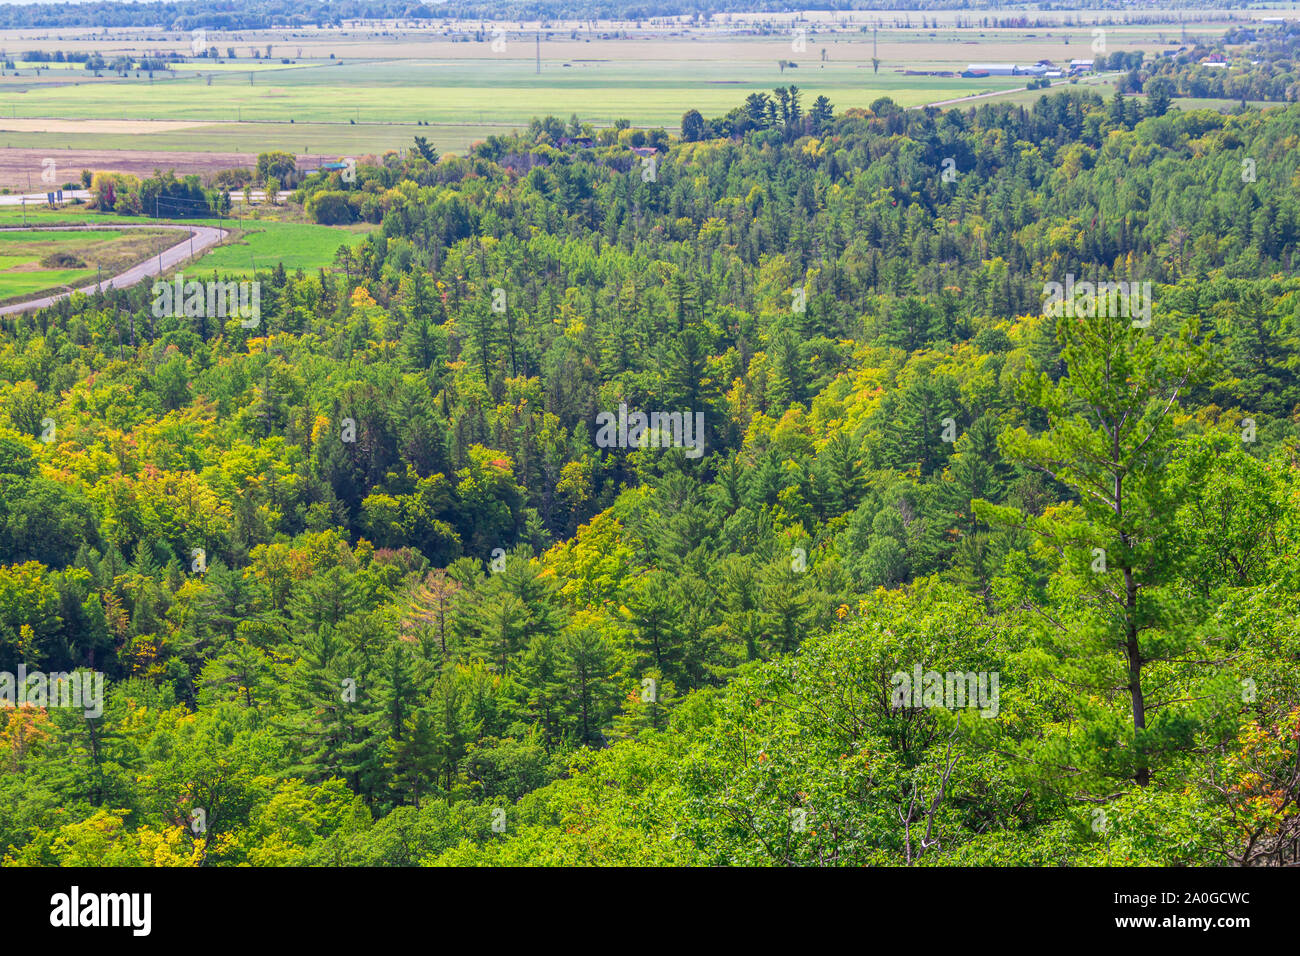 Rocky forested hills in Gatineau Park, Quebec form part of the Canadian Shield and are covered with mixed forests including evergreen trees. Stock Photo